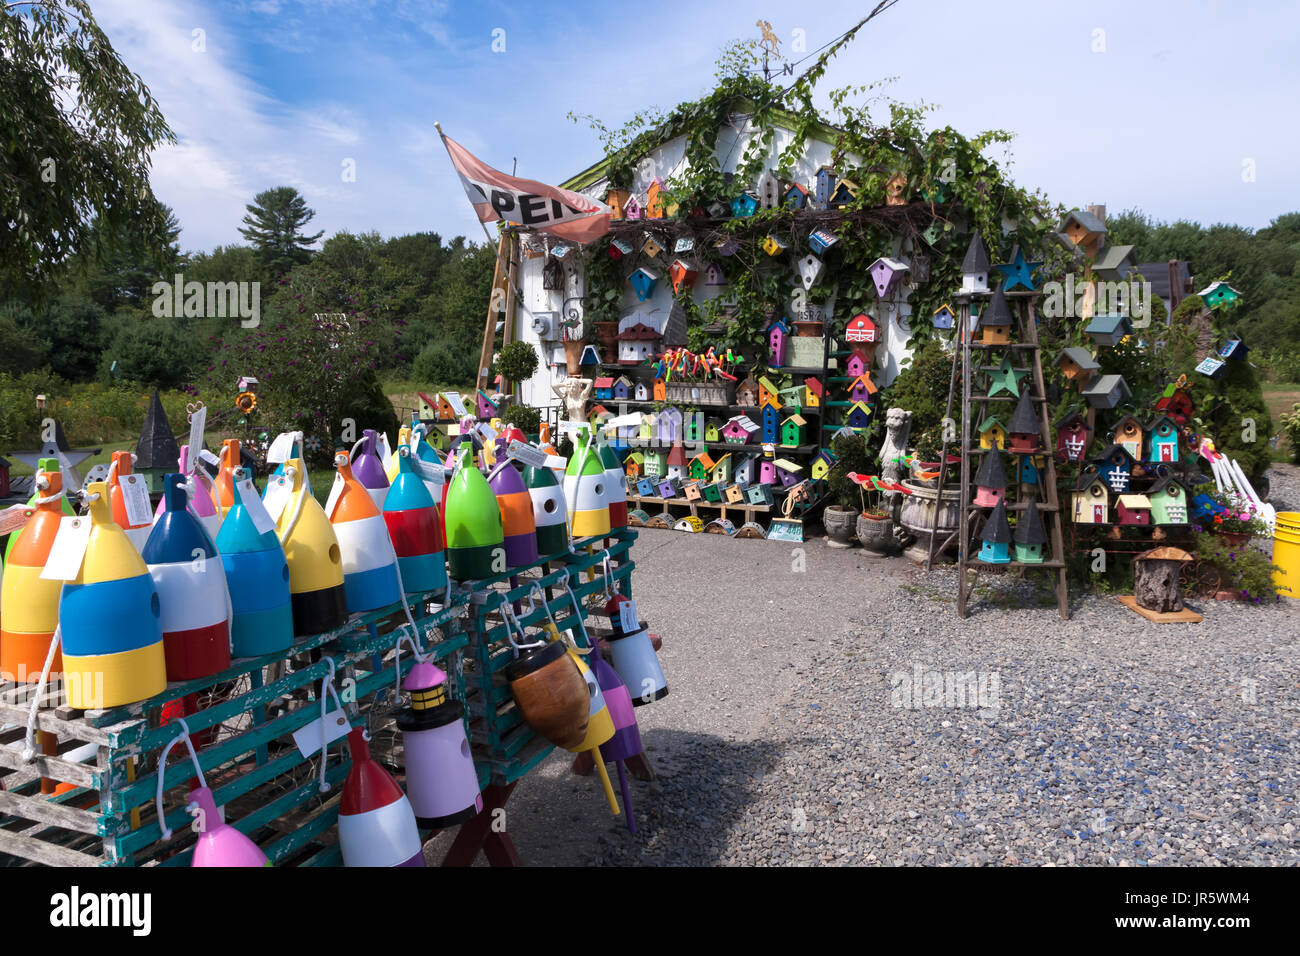 Buoys and birdhouses for sales at a roadside stand outside of Ogunquit, Maine, USA. Stock Photo